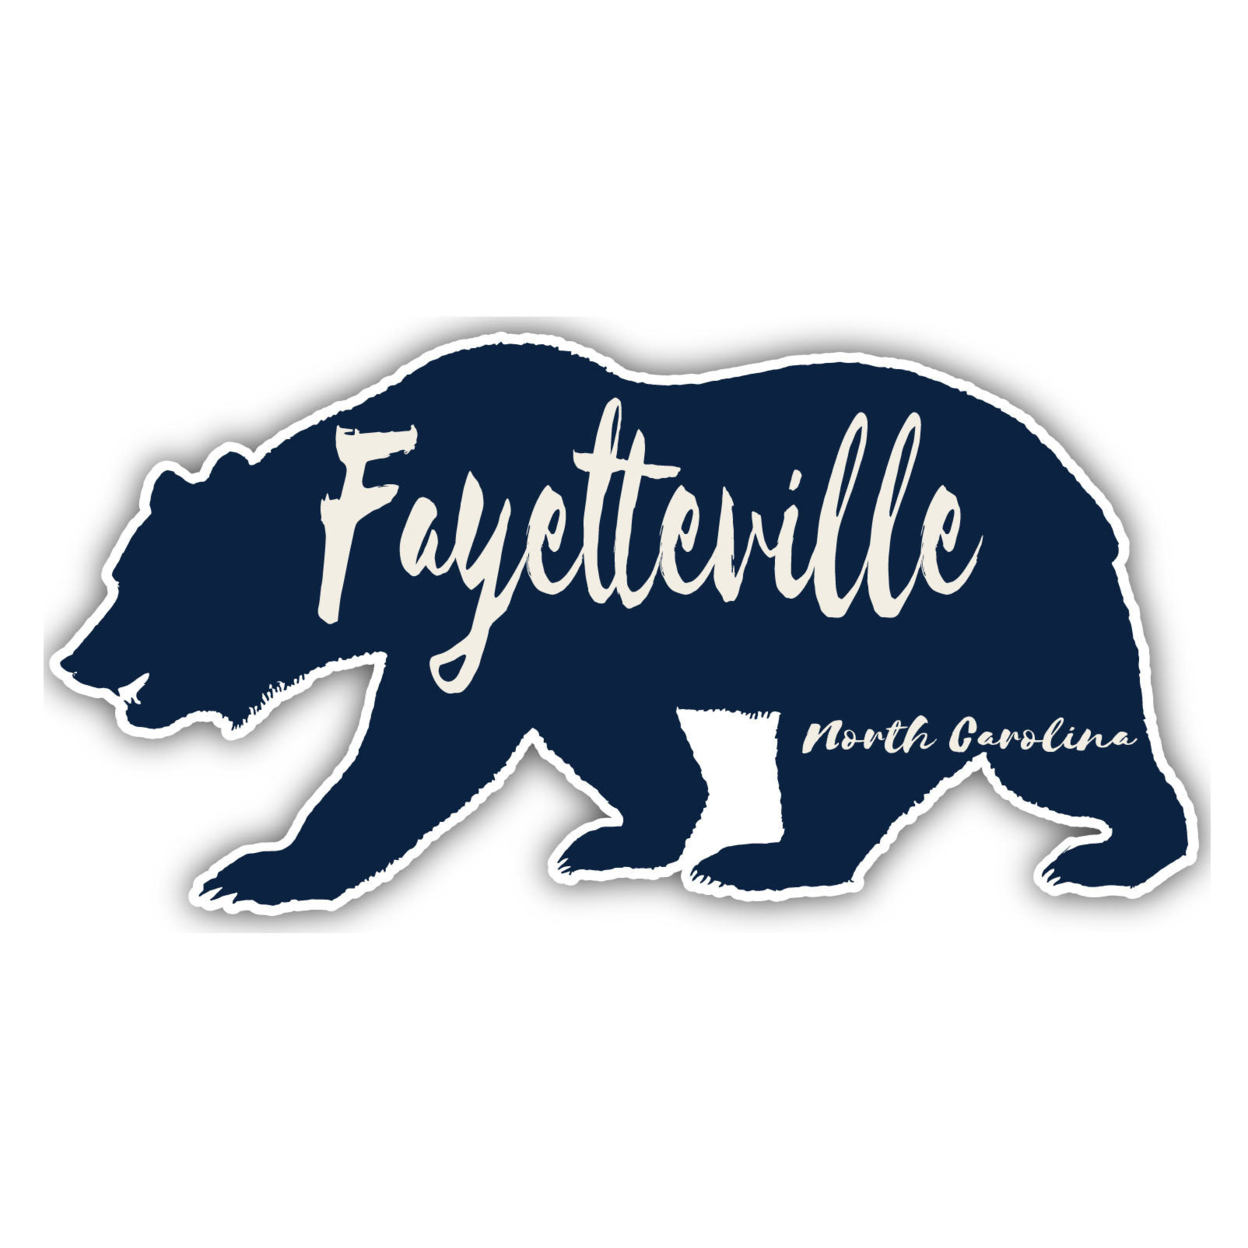 Fayetteville North Carolina Souvenir Decorative Stickers (Choose Theme And Size) - 4-Pack, 6-Inch, Bear